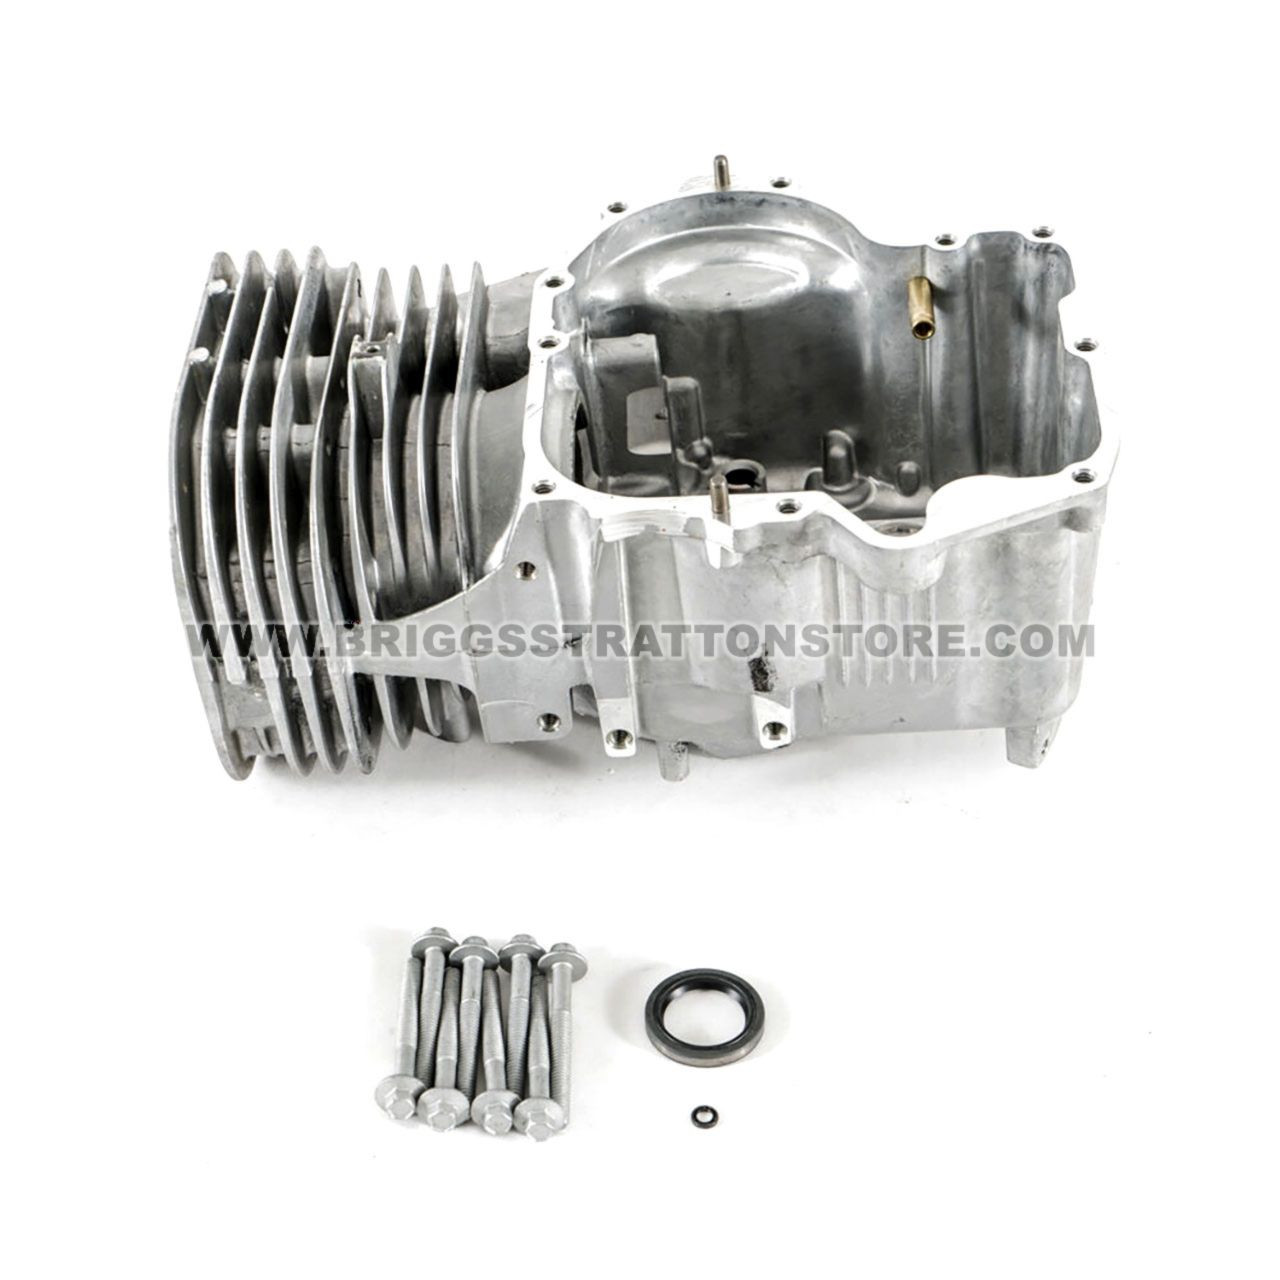 BS-112202-1516) - 4HP BRIGGS & STRATTON SERVICE ENGINE (8/81-12/05) (020) -  CYLINDER HEAD ASSY. & RELATED PARTS New Holland Agriculture